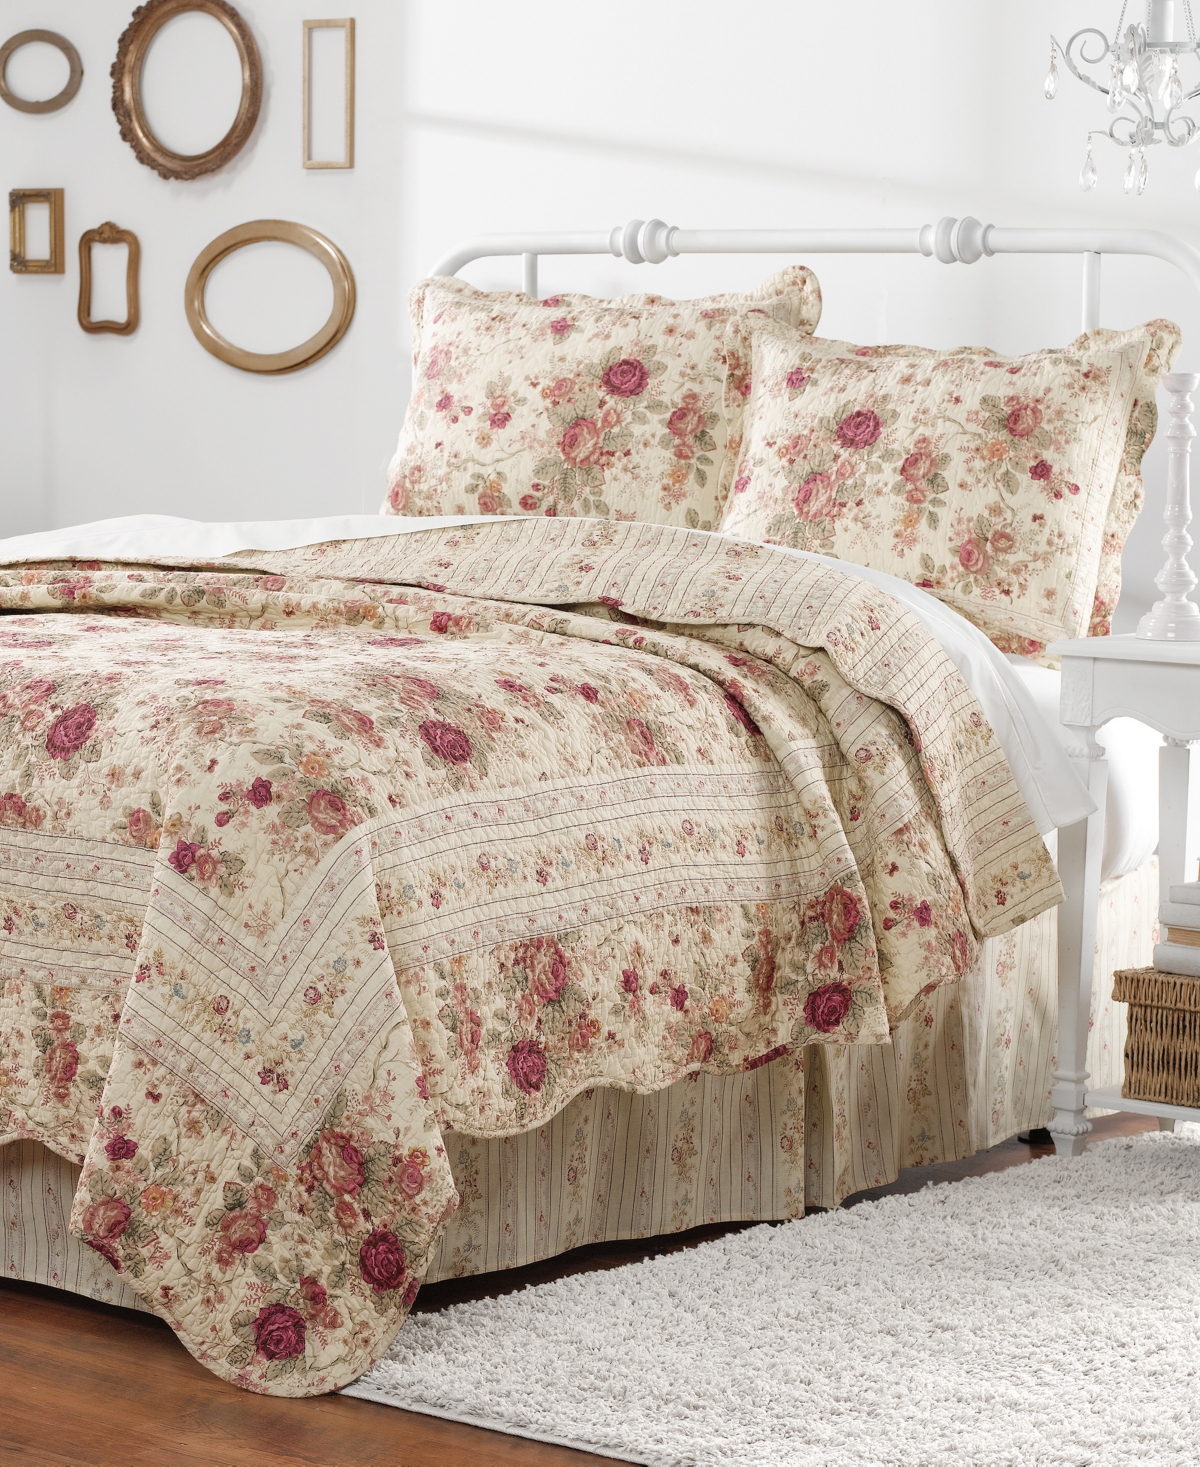 Greenland Home Fashions Antique-like Rose 100% Cotton Reversible 3 Piece Quilt Set, Full/queen In Ecru